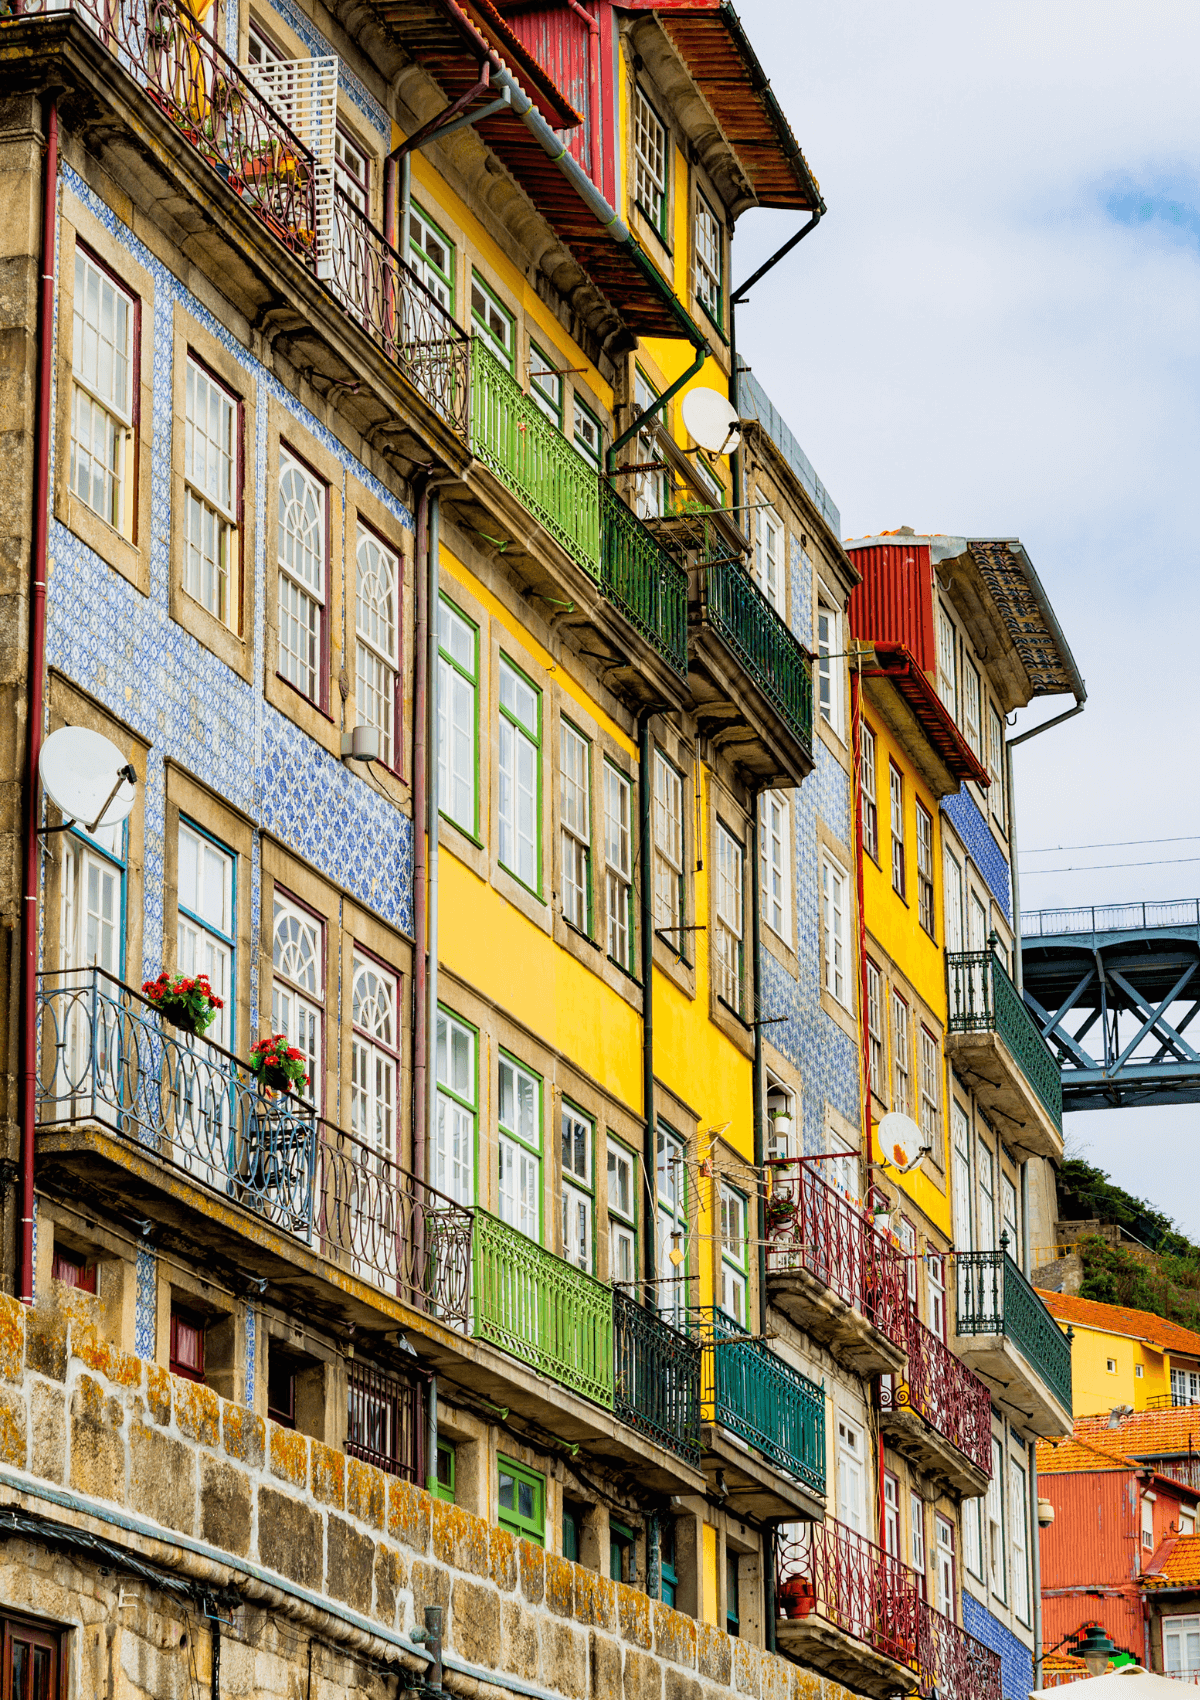 Ribeira district Porto is a must-visit and one of the best things to do